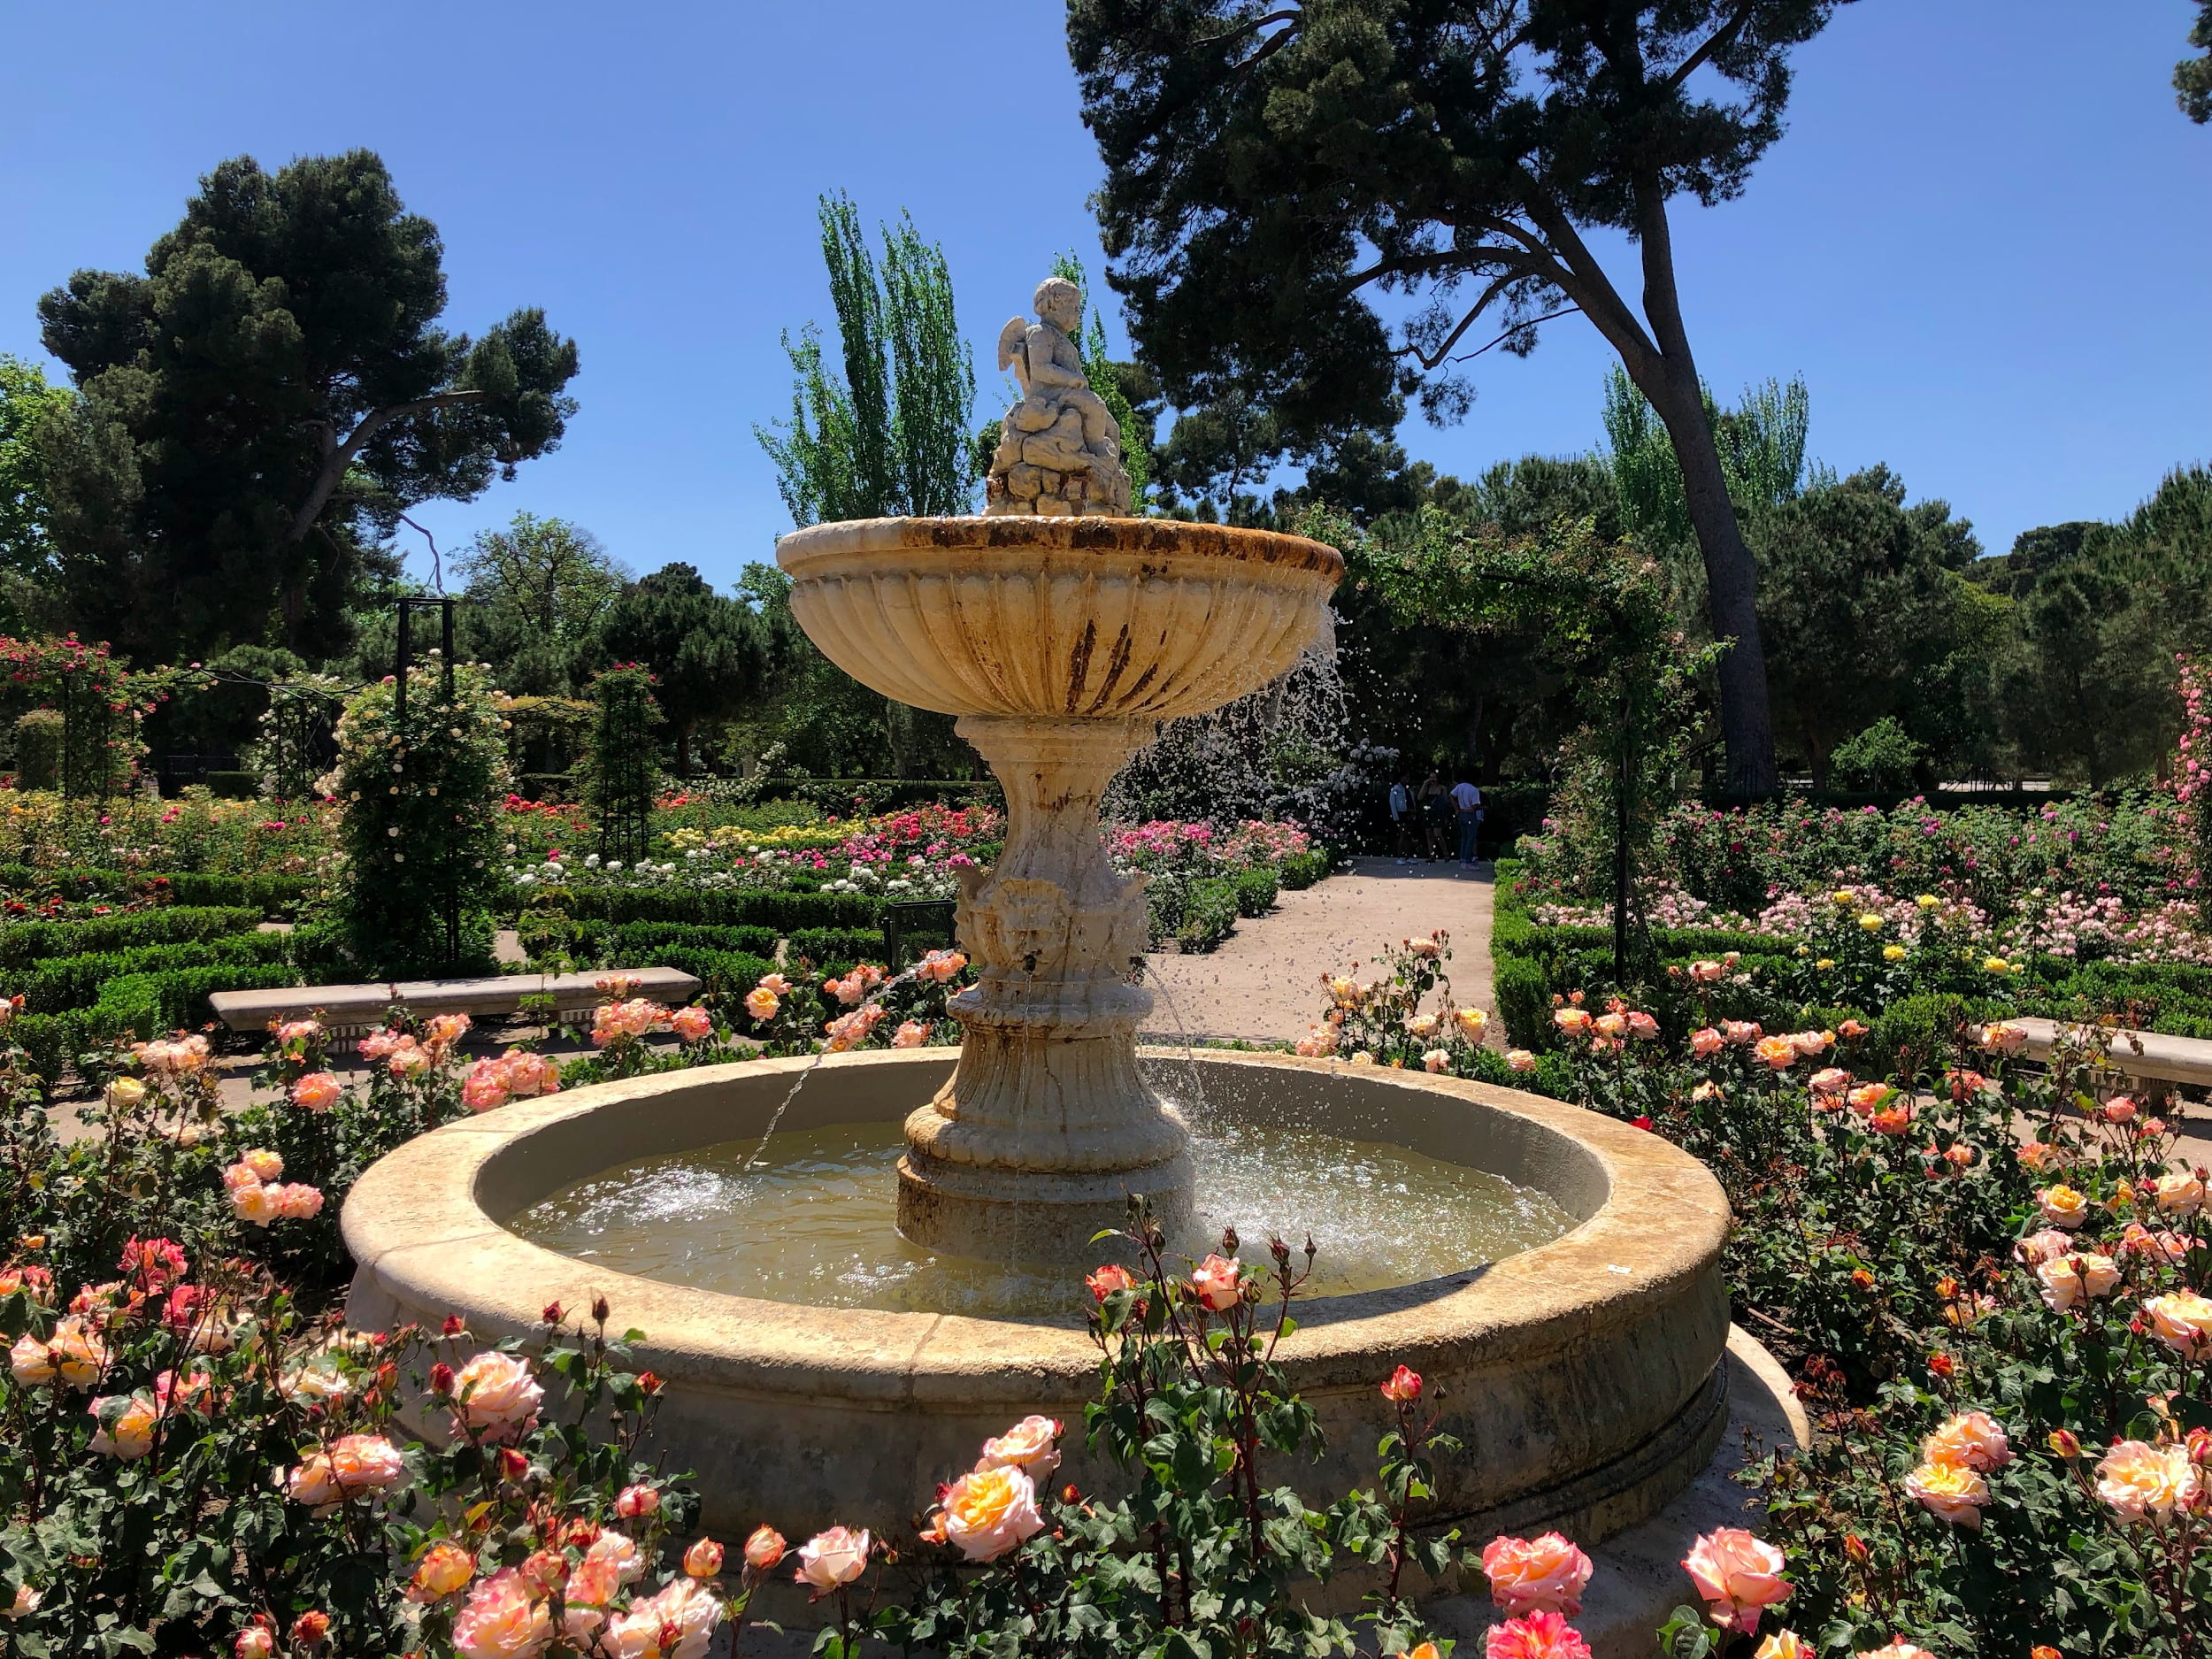 Water fountain made of beige material surrounded by pink roses, green shrubbery and blue sky in background